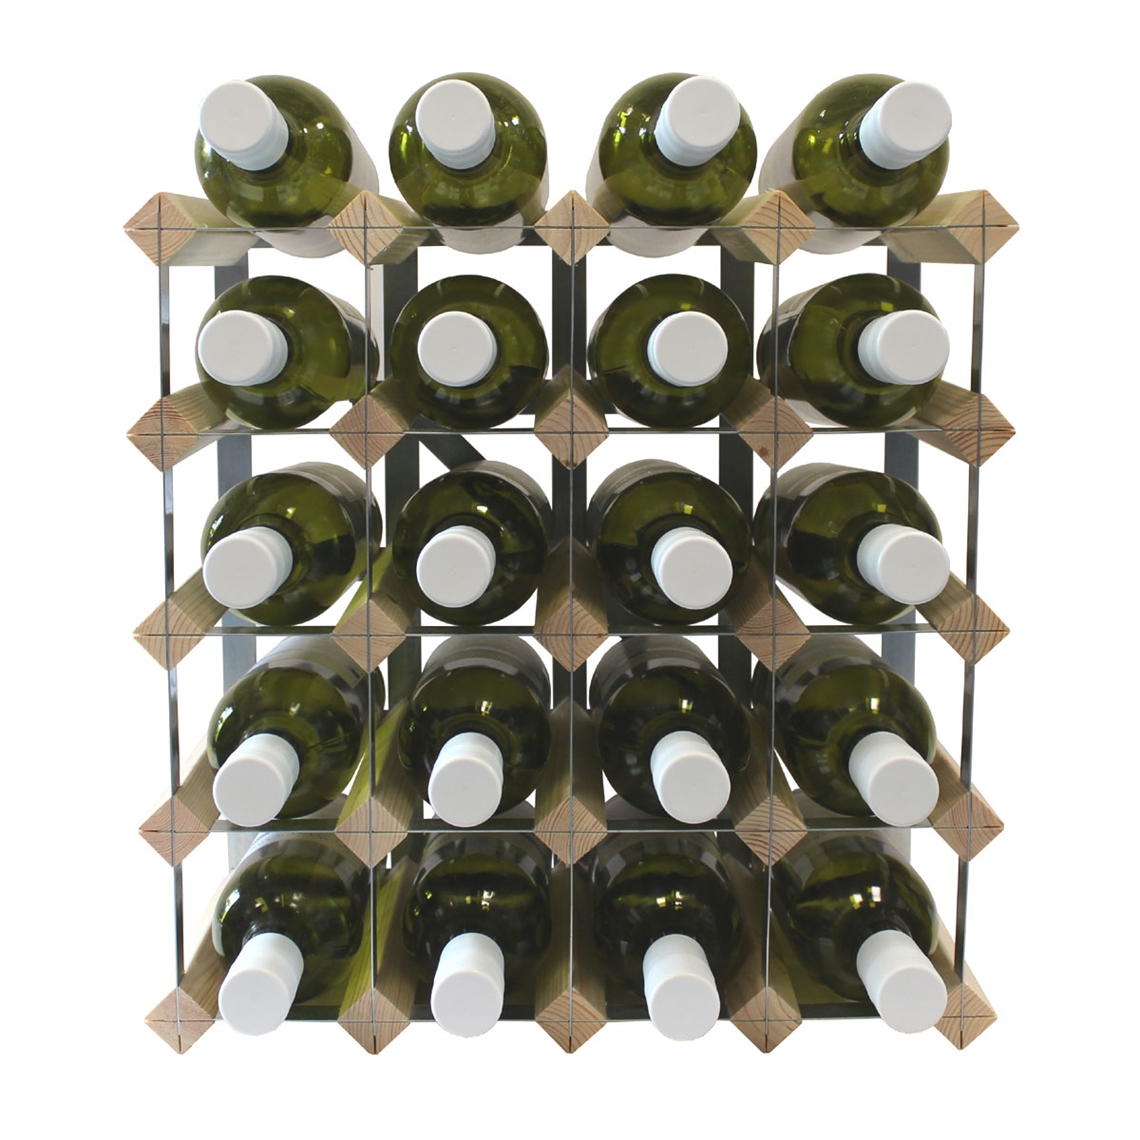 View more wall mounted wine racks from our Assembled Wine Racks range